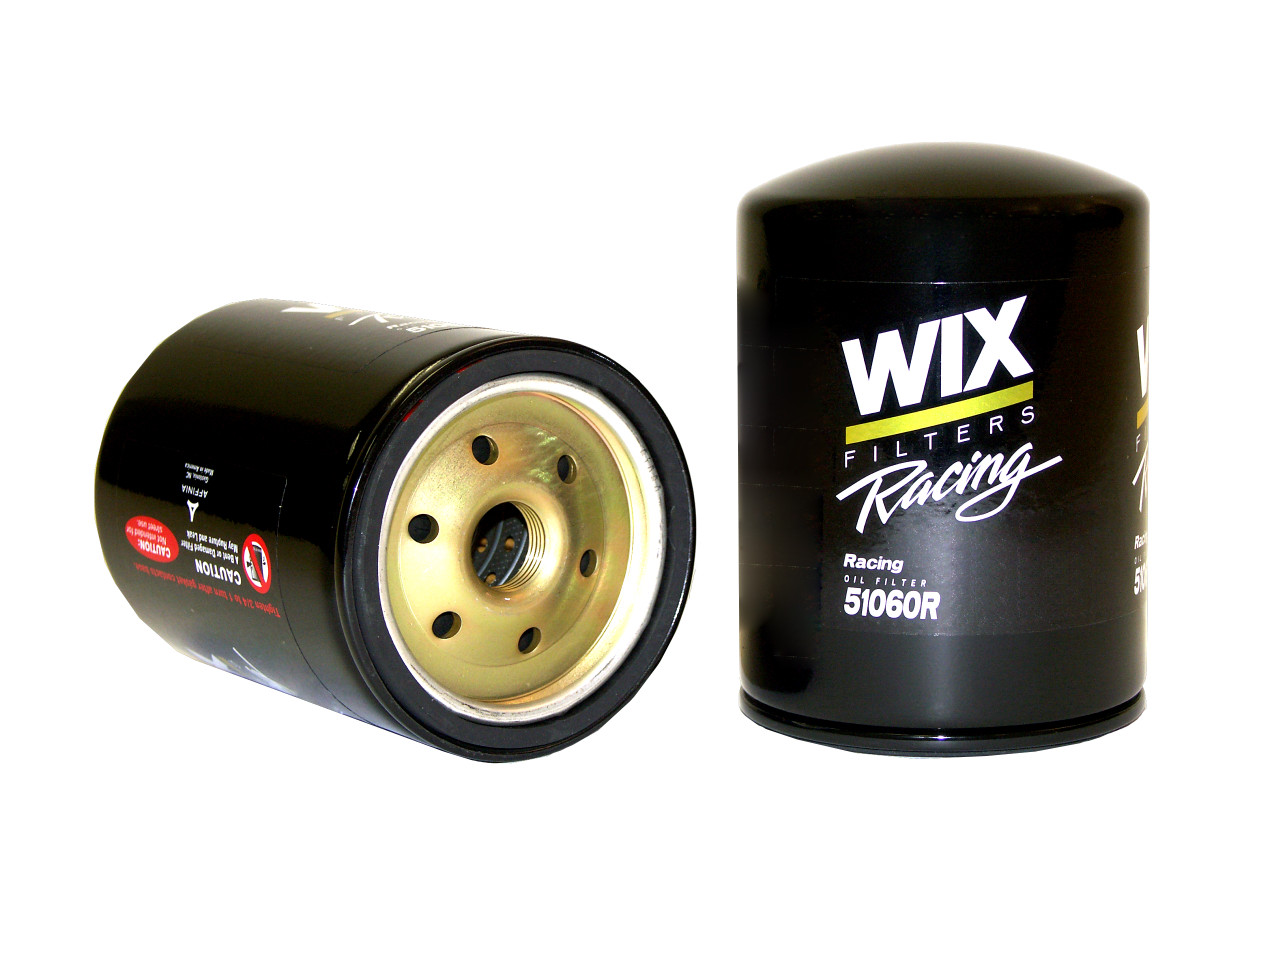 WIX Filters Racing Oil Filter - 51060R - Chevy w/ Antidrain